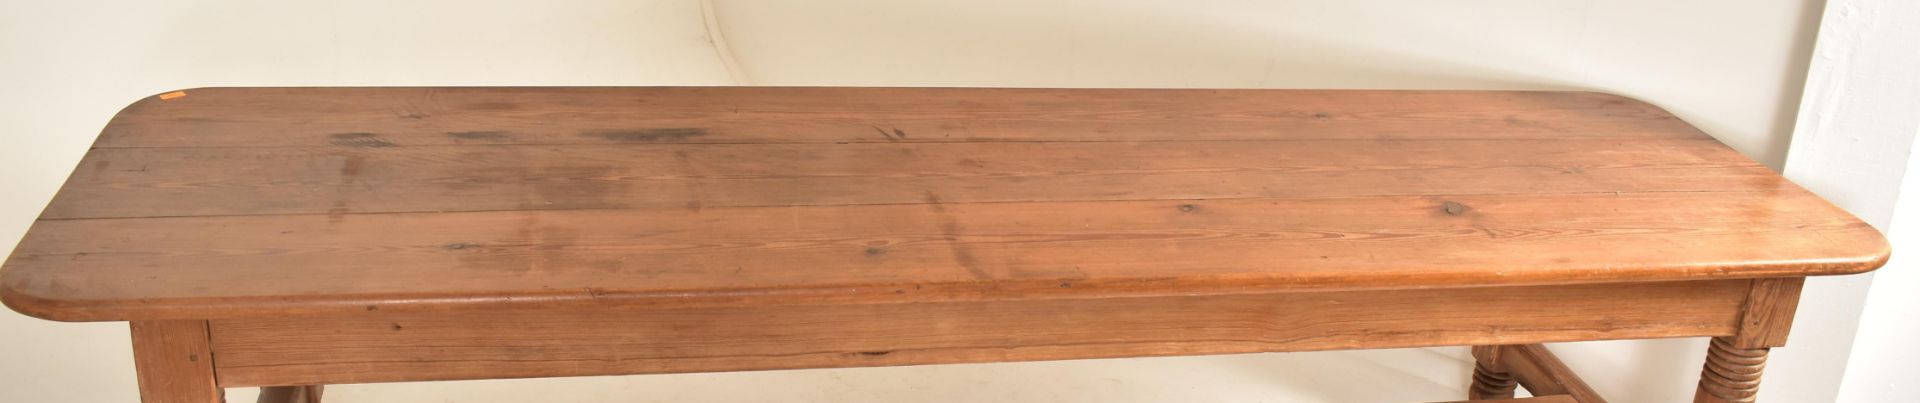 LARGE 20TH CENTURY PINE WOOD REFECTORY DINING TABLE - Image 3 of 6